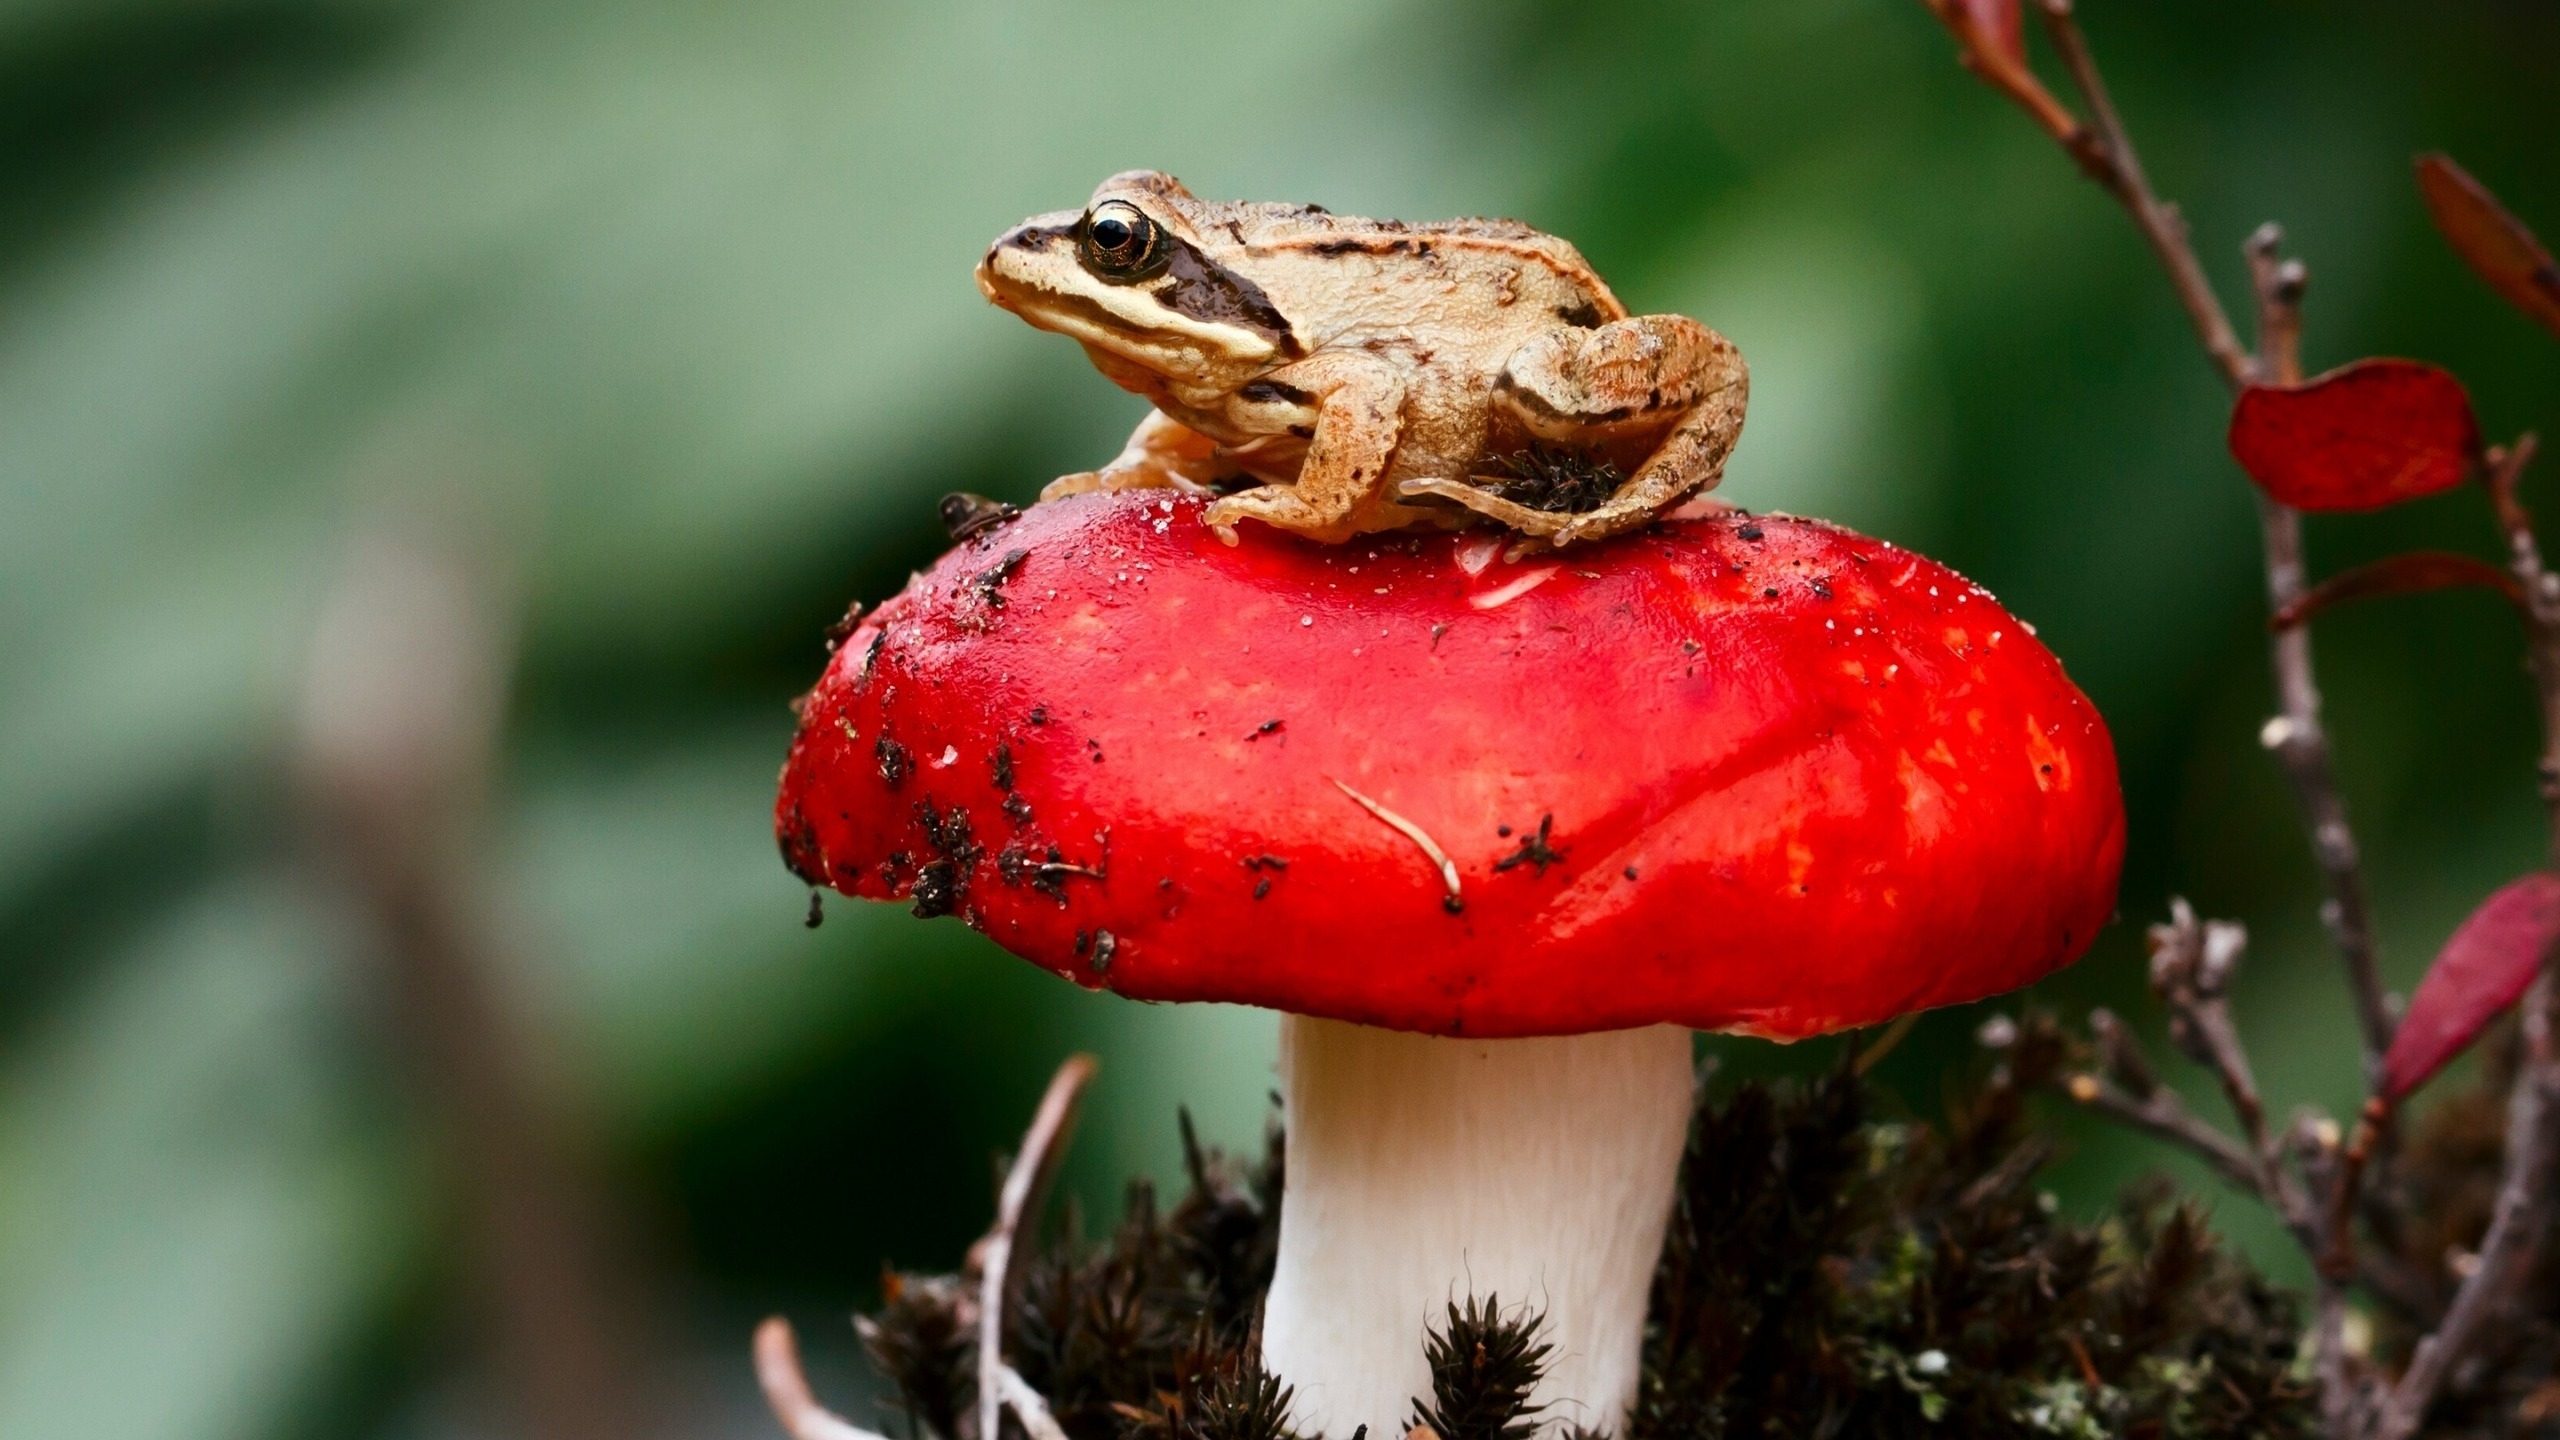 Frog Sitting on a Red Mushroom for 2560x1440 HDTV resolution